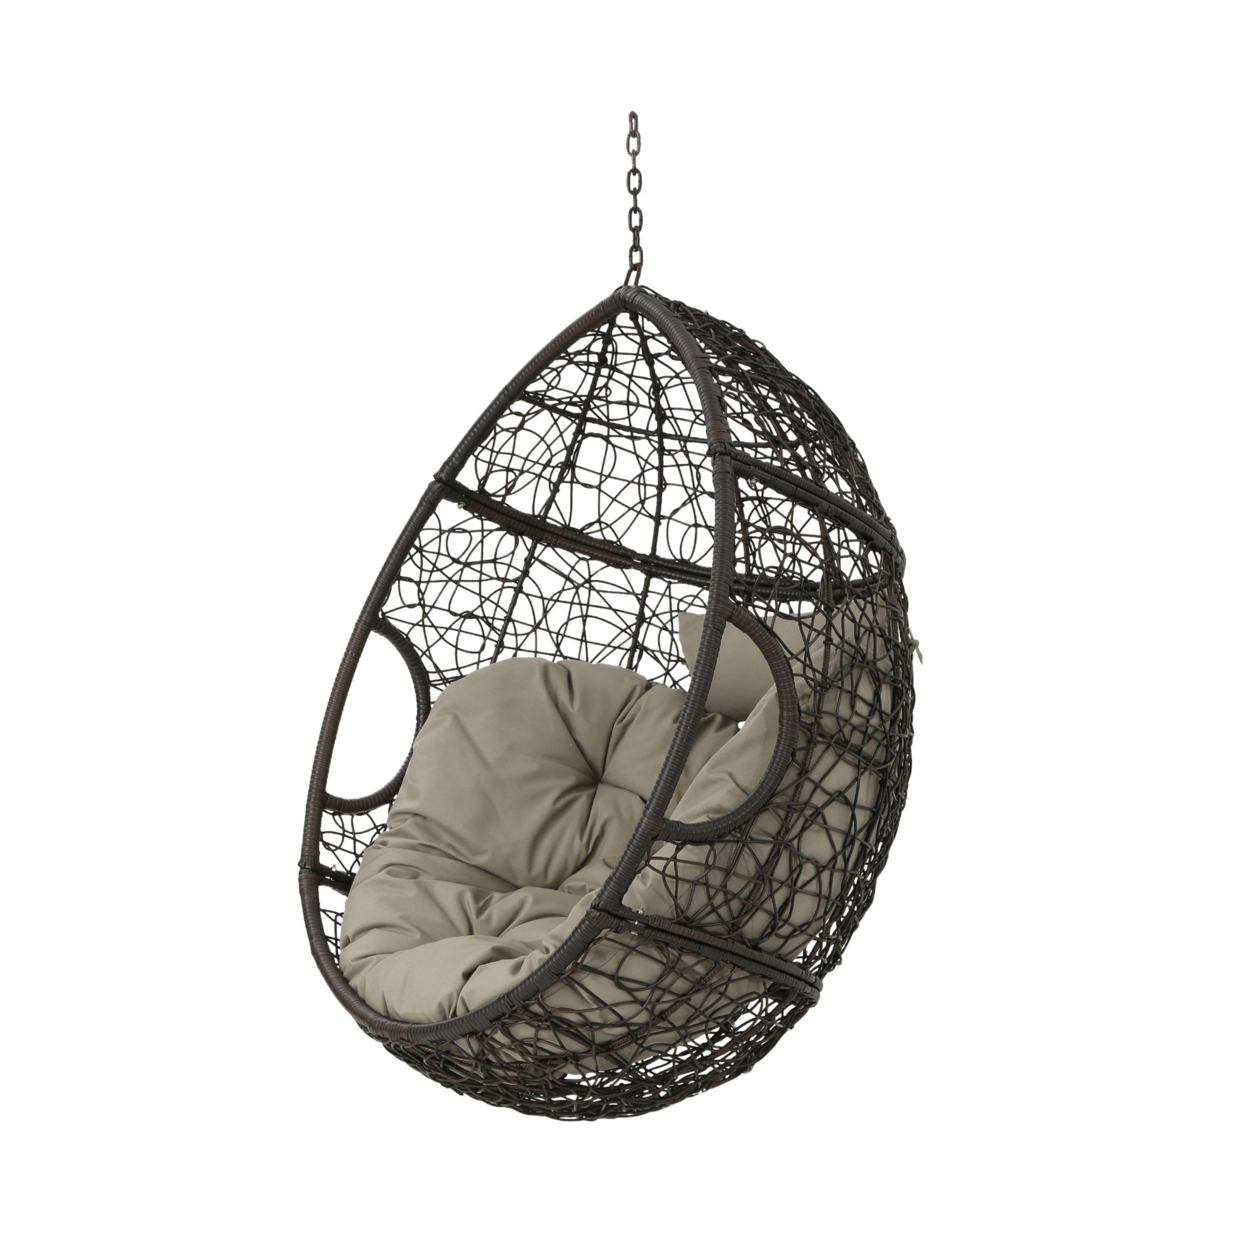 Yosiyah Indoor/Outdoor Hanging Teardrop / Egg Chair (Stand Not Included) - Black/gray